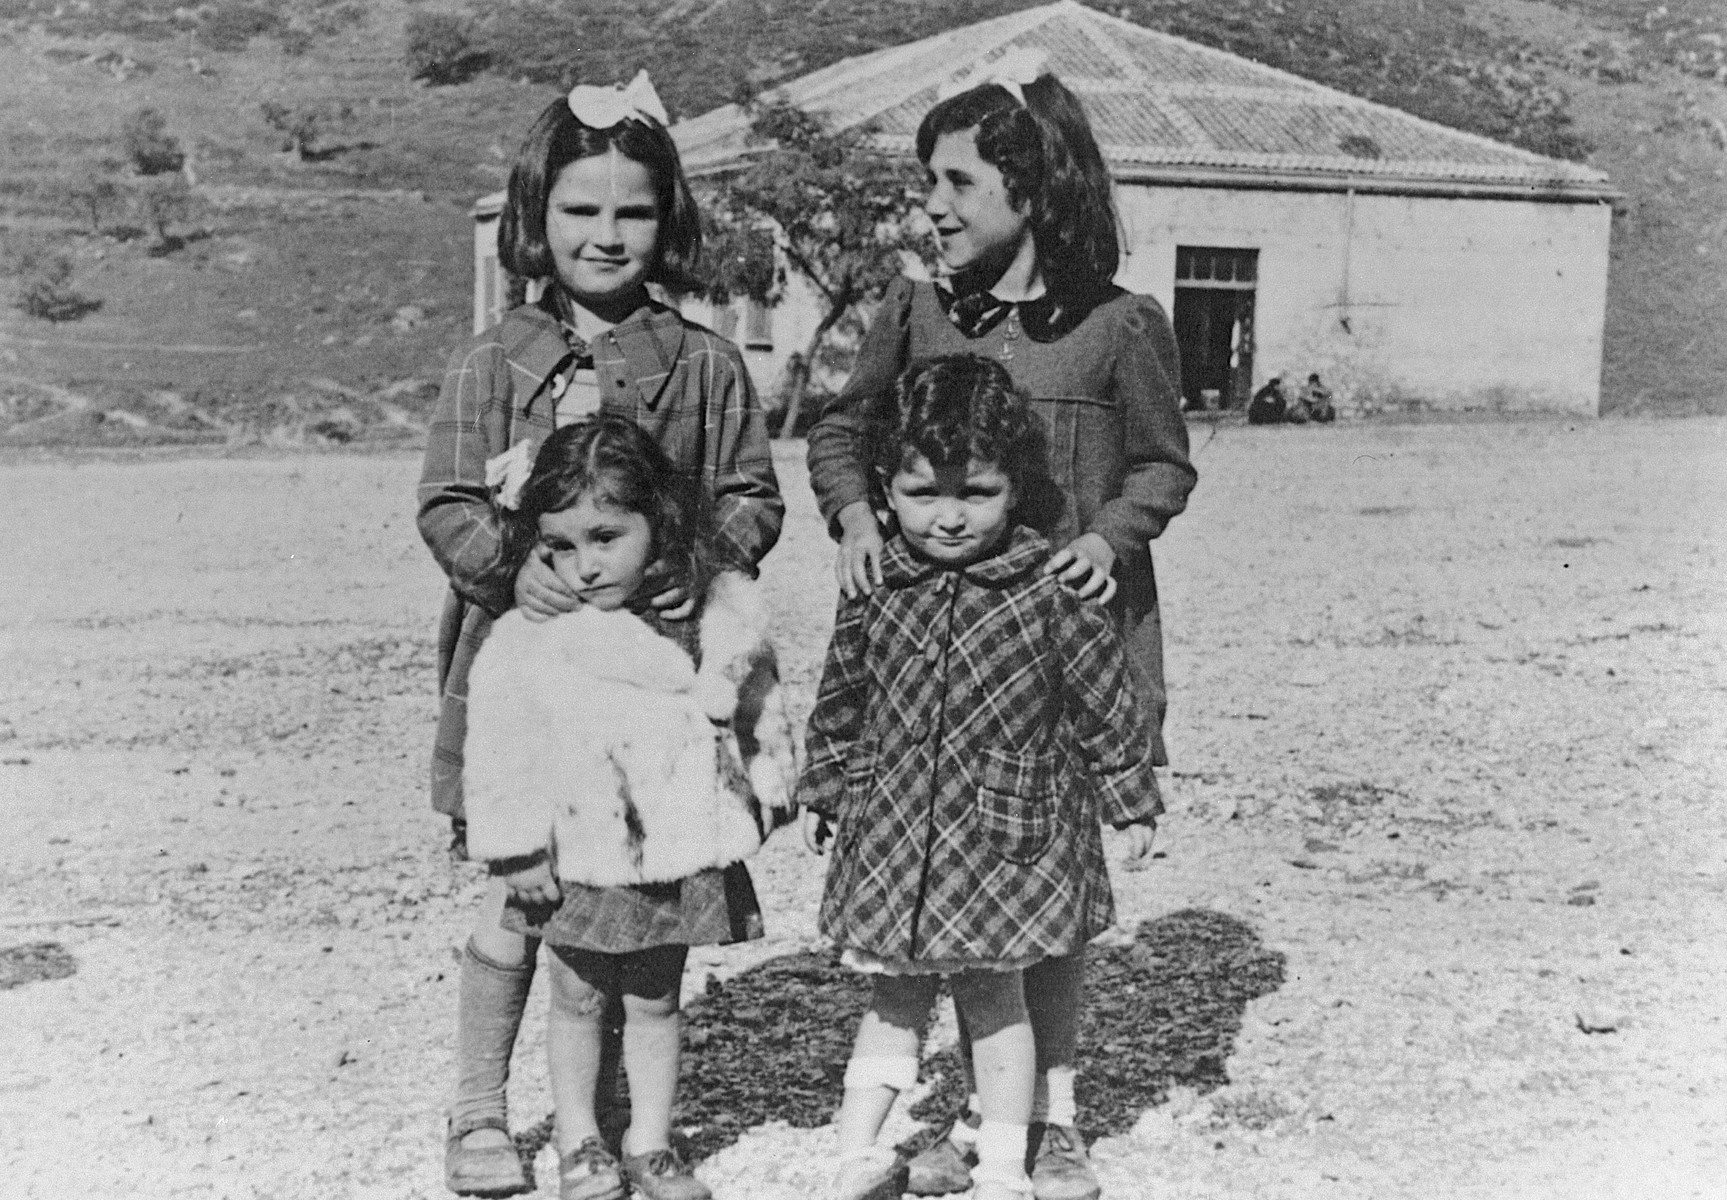 Four young Greek-Jewish cousins visit their grandparents in Delvine, Albania.

Pictured are Gracia Raphael, Graciela Cohen, Eni Cohen, and Ninetta Matsa.

Gracia Raphael was deported from Greece to Auschwitz, where she perished. Graciela and Eni survived in Albania, Ninetta survived in Greece. The Albanian Jewish community was unharmed during the Holocaust.
 
Graciela and Eni immigrated with their families to the United States 1991 after the collapse of Communism in Albania.